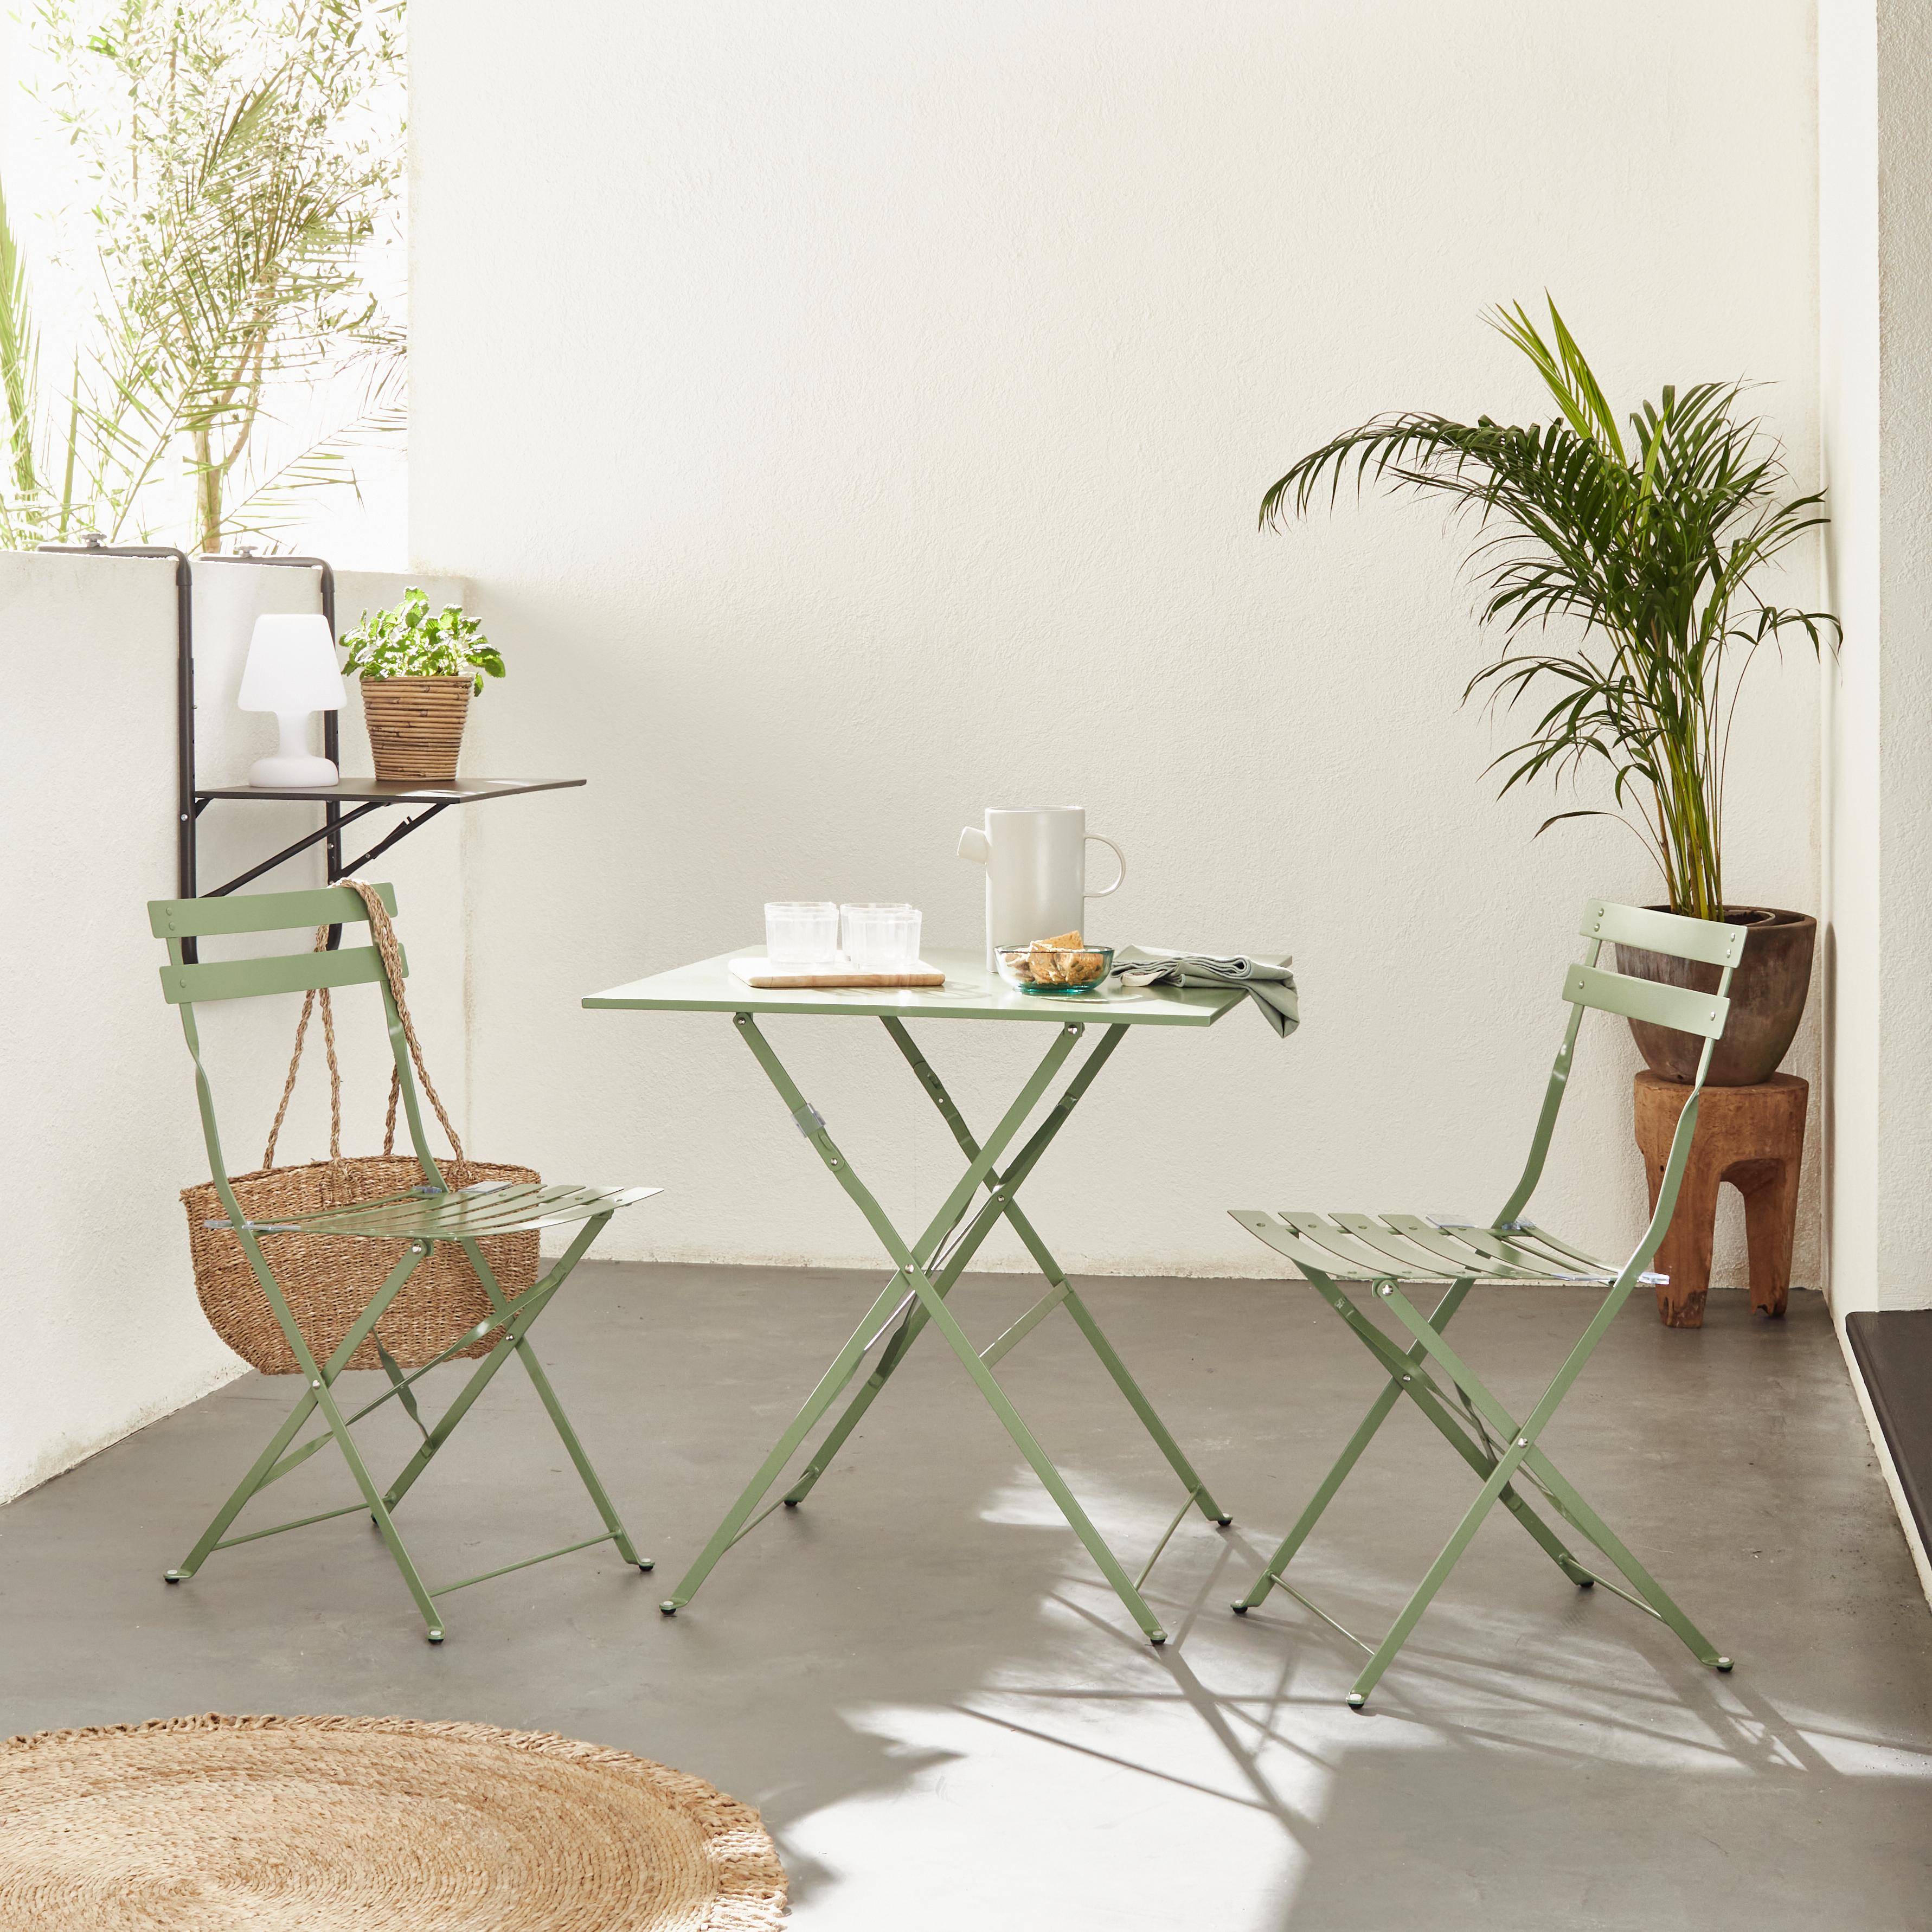 2-seater foldable thermo-lacquered steel bistro garden table with chairs, 70x70cm - Emilia - Sage geen Photo1